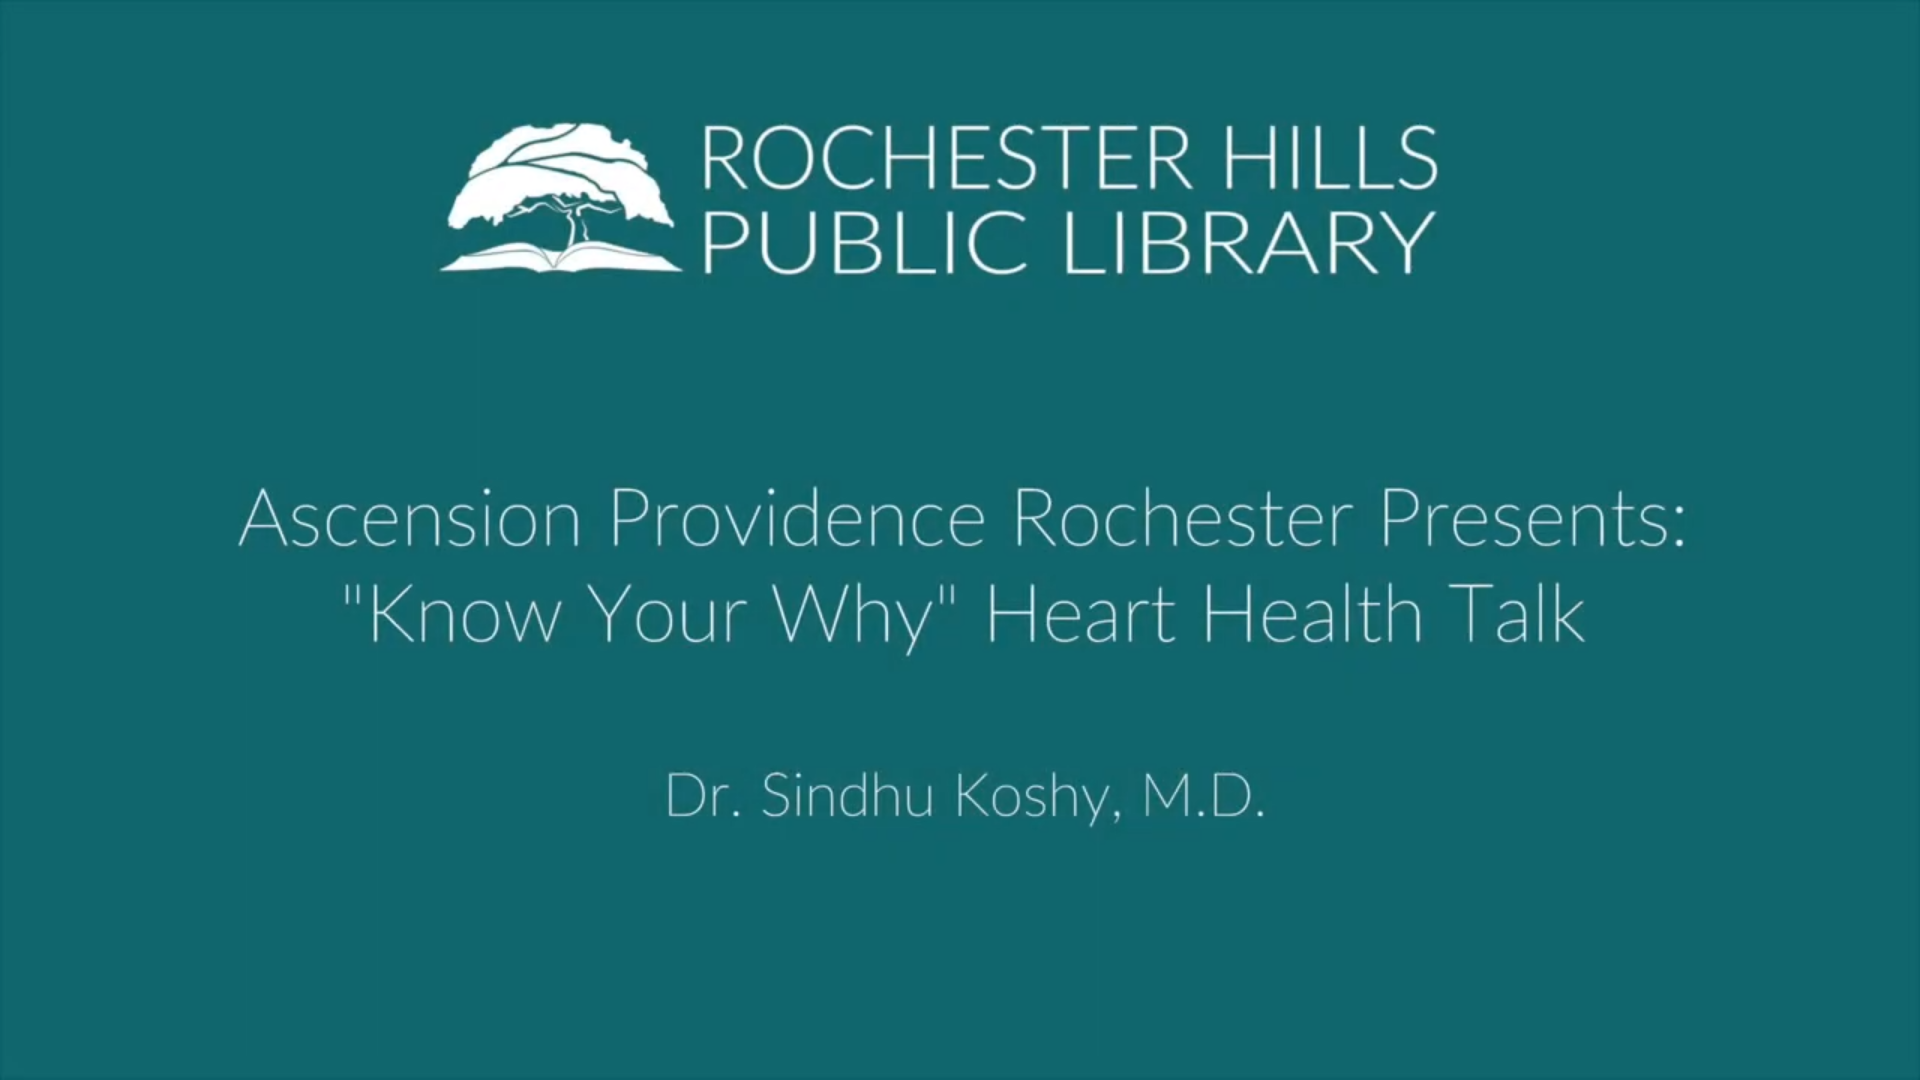 Ascension Providence Rochester Hospital Presents "Know Your Why" Heart Health Talk